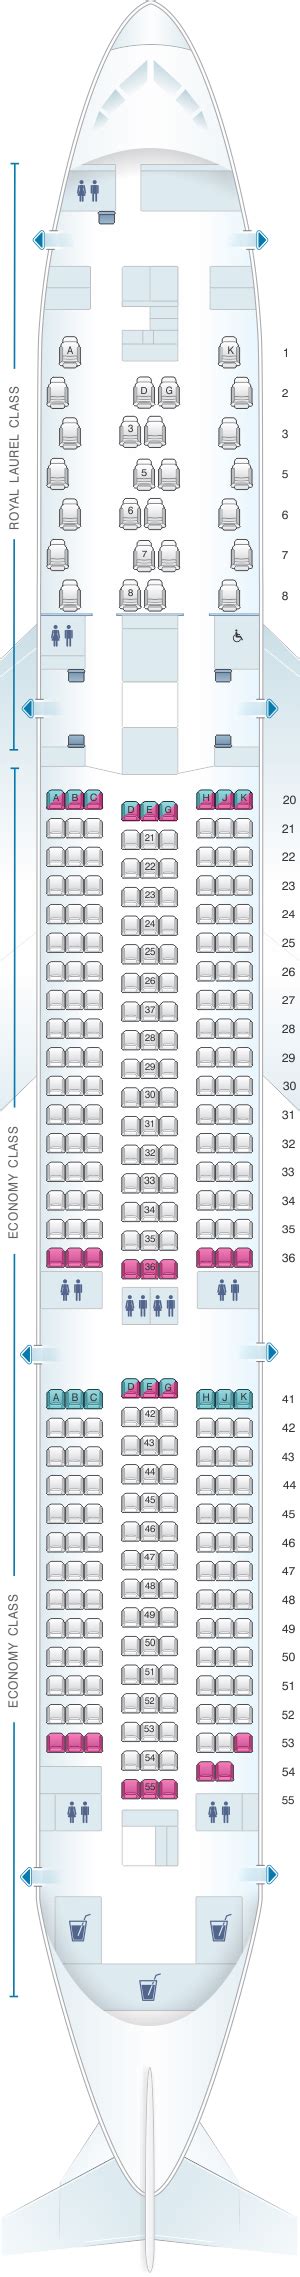 Seat Map And Seating Chart Eva Air Boeing 777 300er 323 Pax Boeing